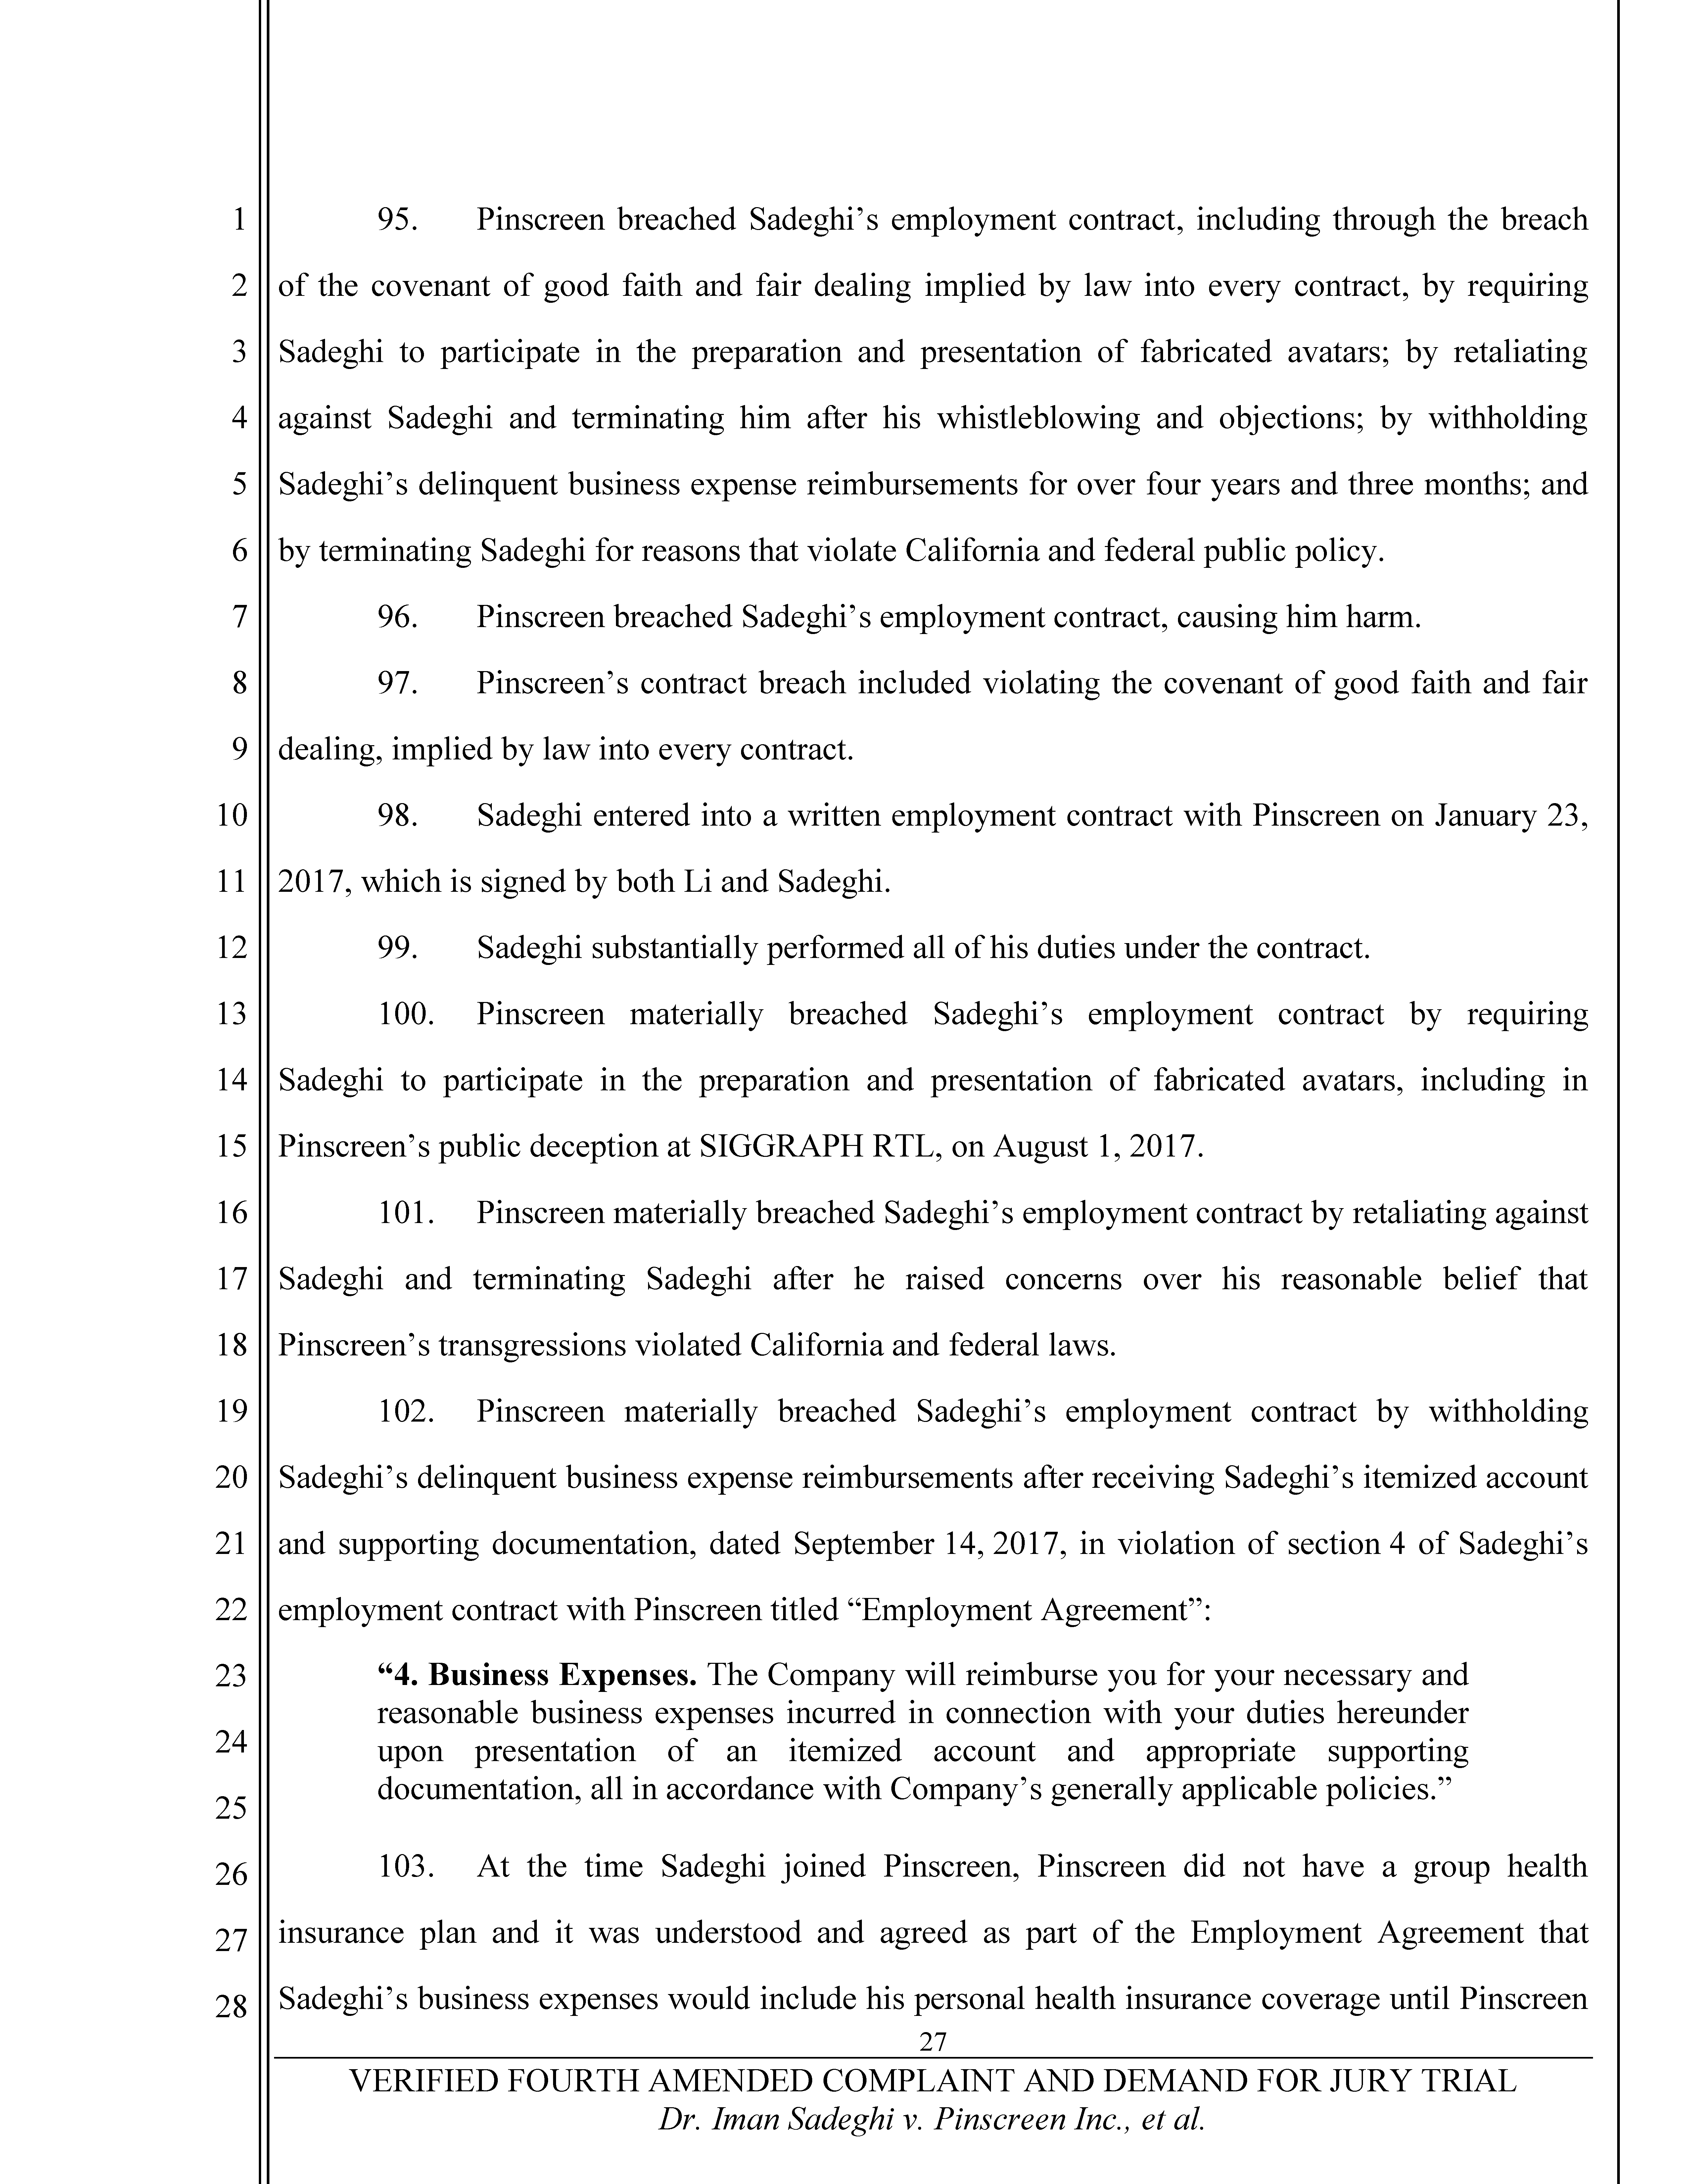 Fourth Amended Complaint (4AC) Page 28